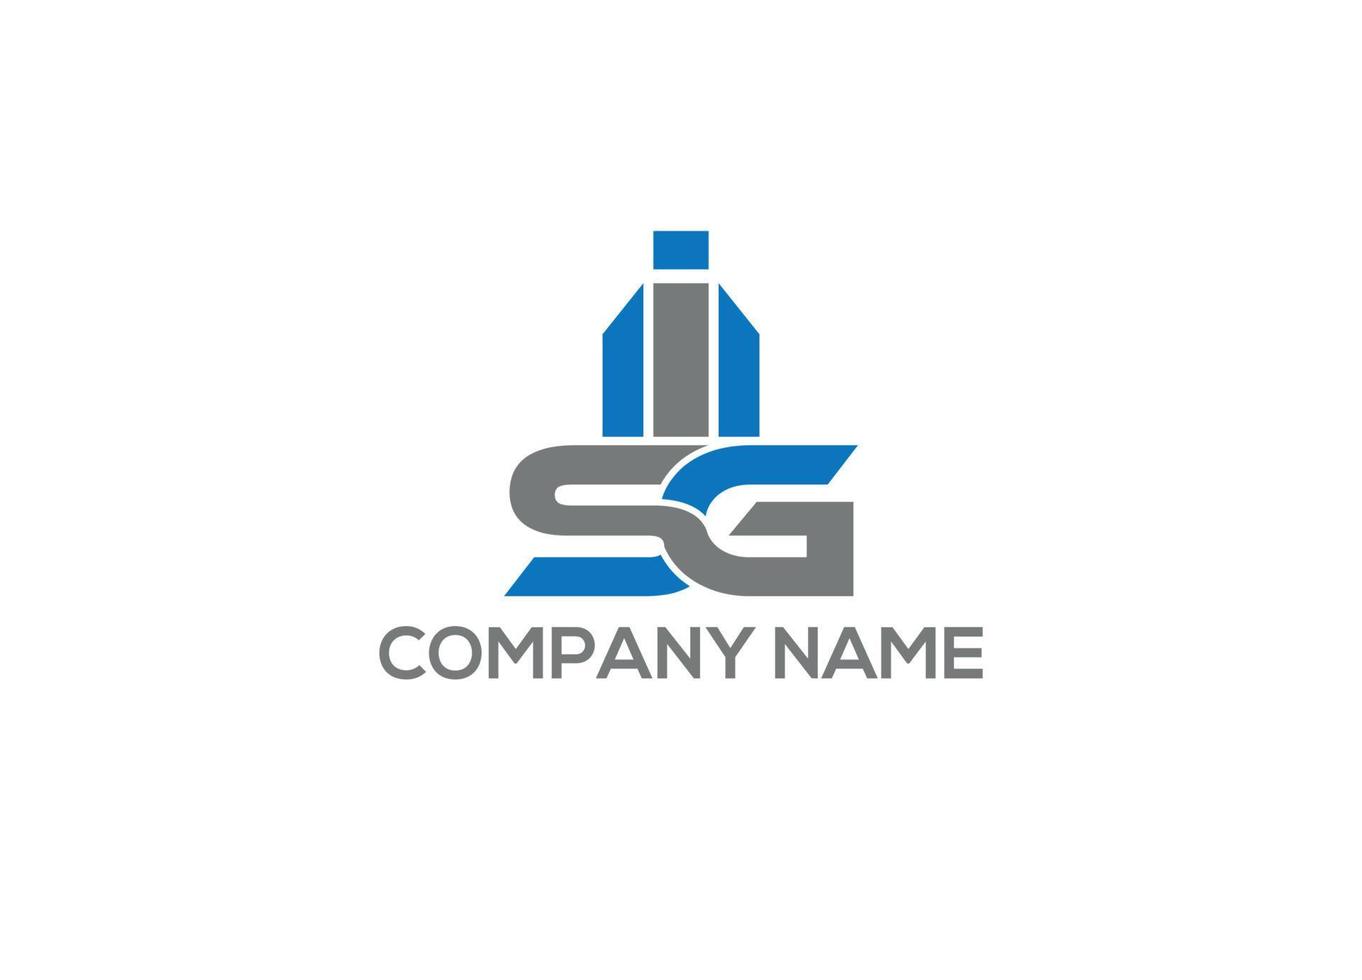 SIG initial logo design vector icon template with white background